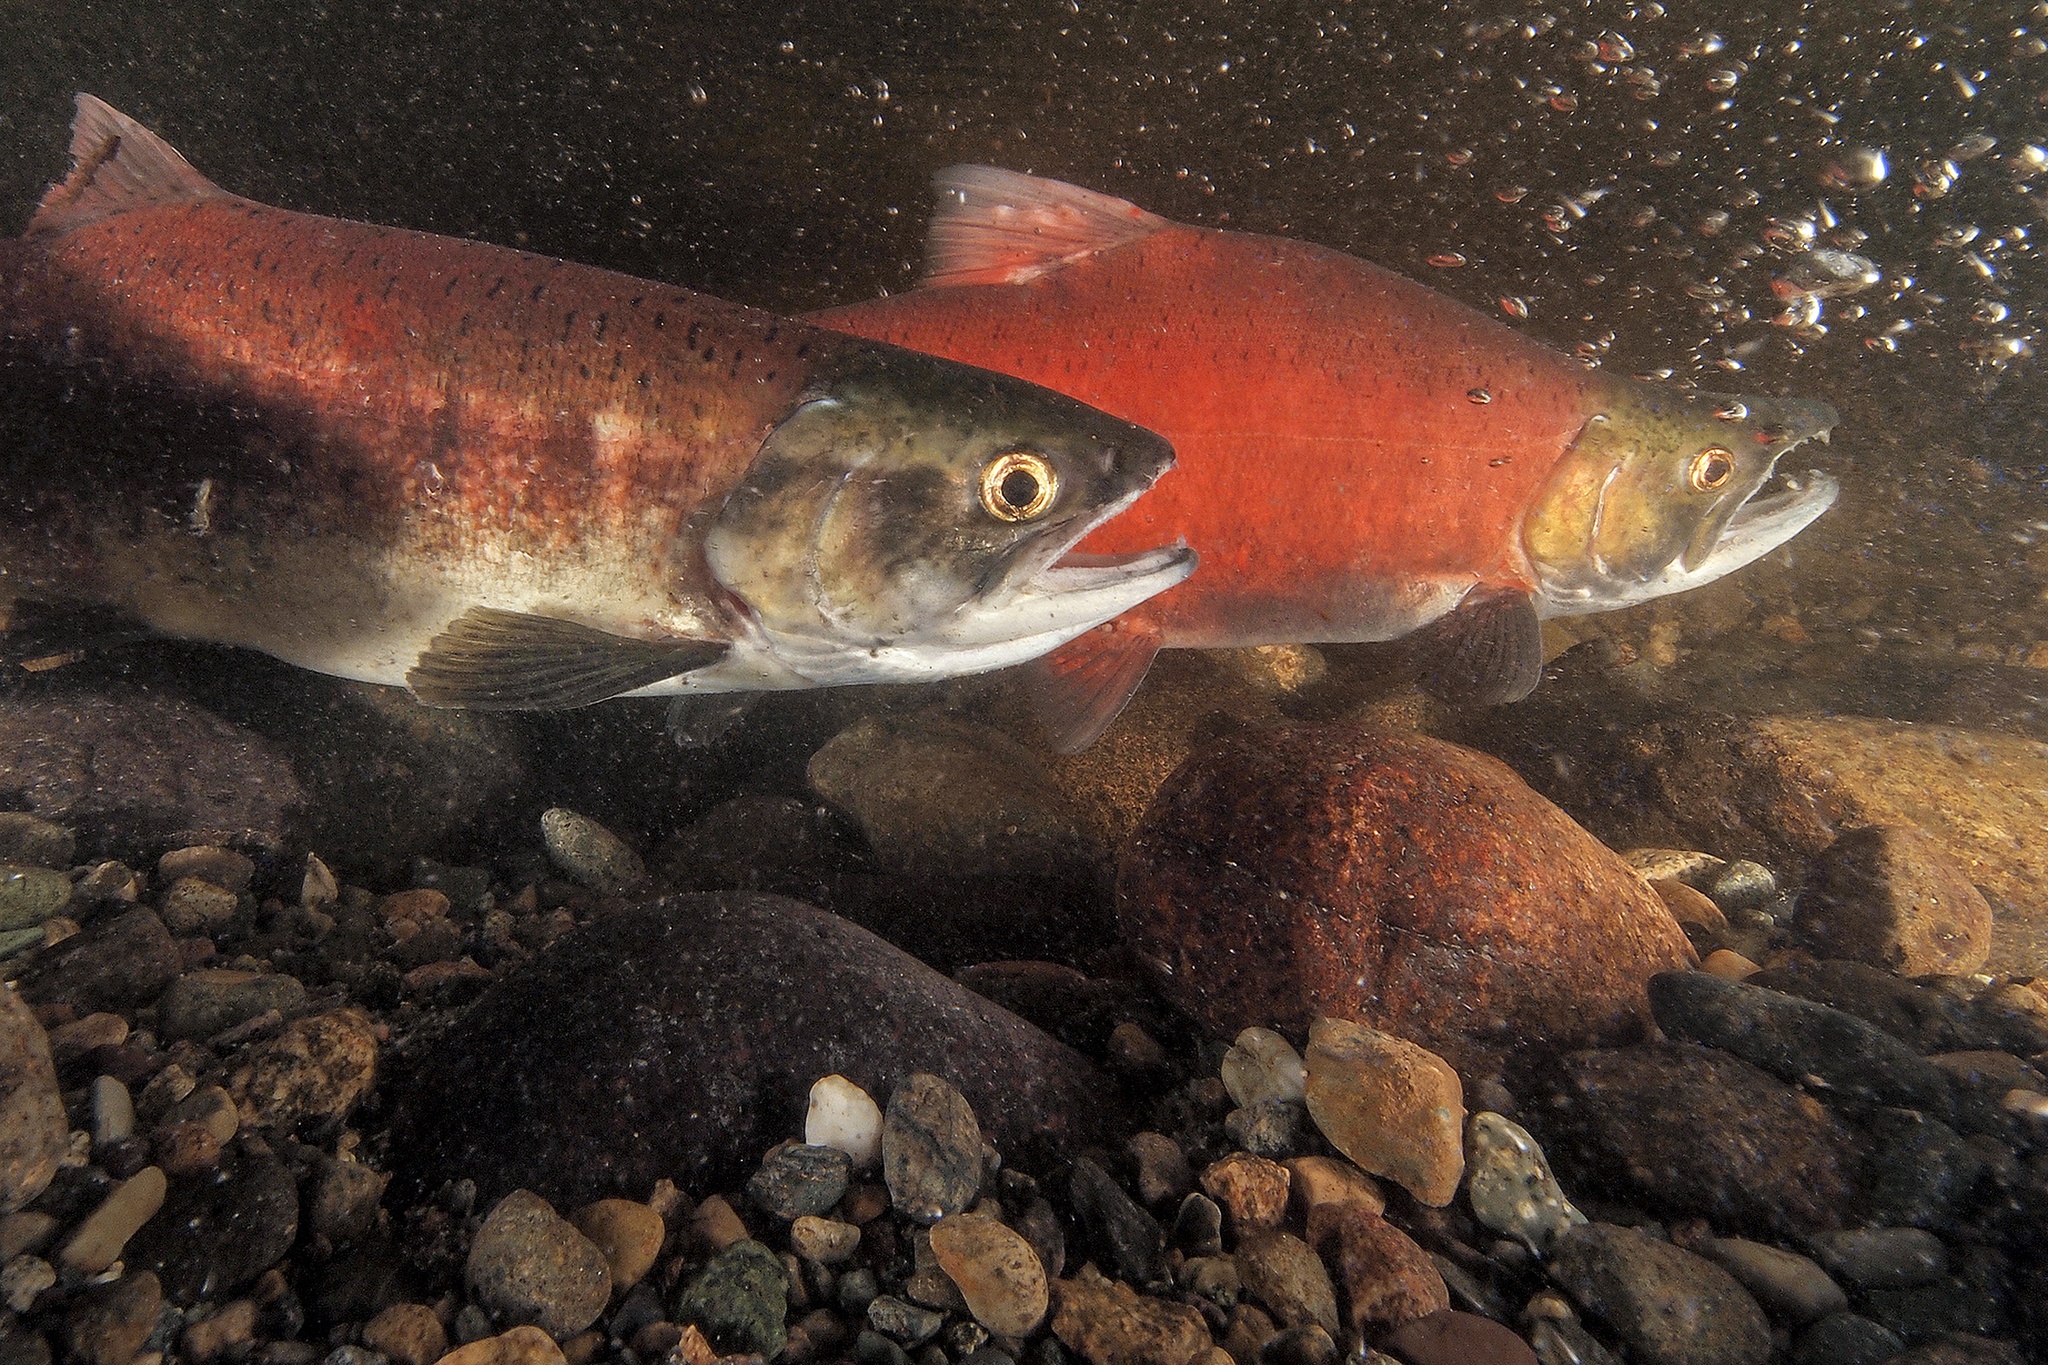 A pair of kokanee salmon are seen on Nov. 16, 2012 in Ebright Creek just east of Lake Sammamish. Efforts to help restore natural habitat have helped kokanee reclaim breeding grounds around Lake Sammamish but similar projects are lagging at nearby Lake Washington where populations are heavily depleted. (Courtesy of Roger Tabor, US Fish and Wildlife Service)